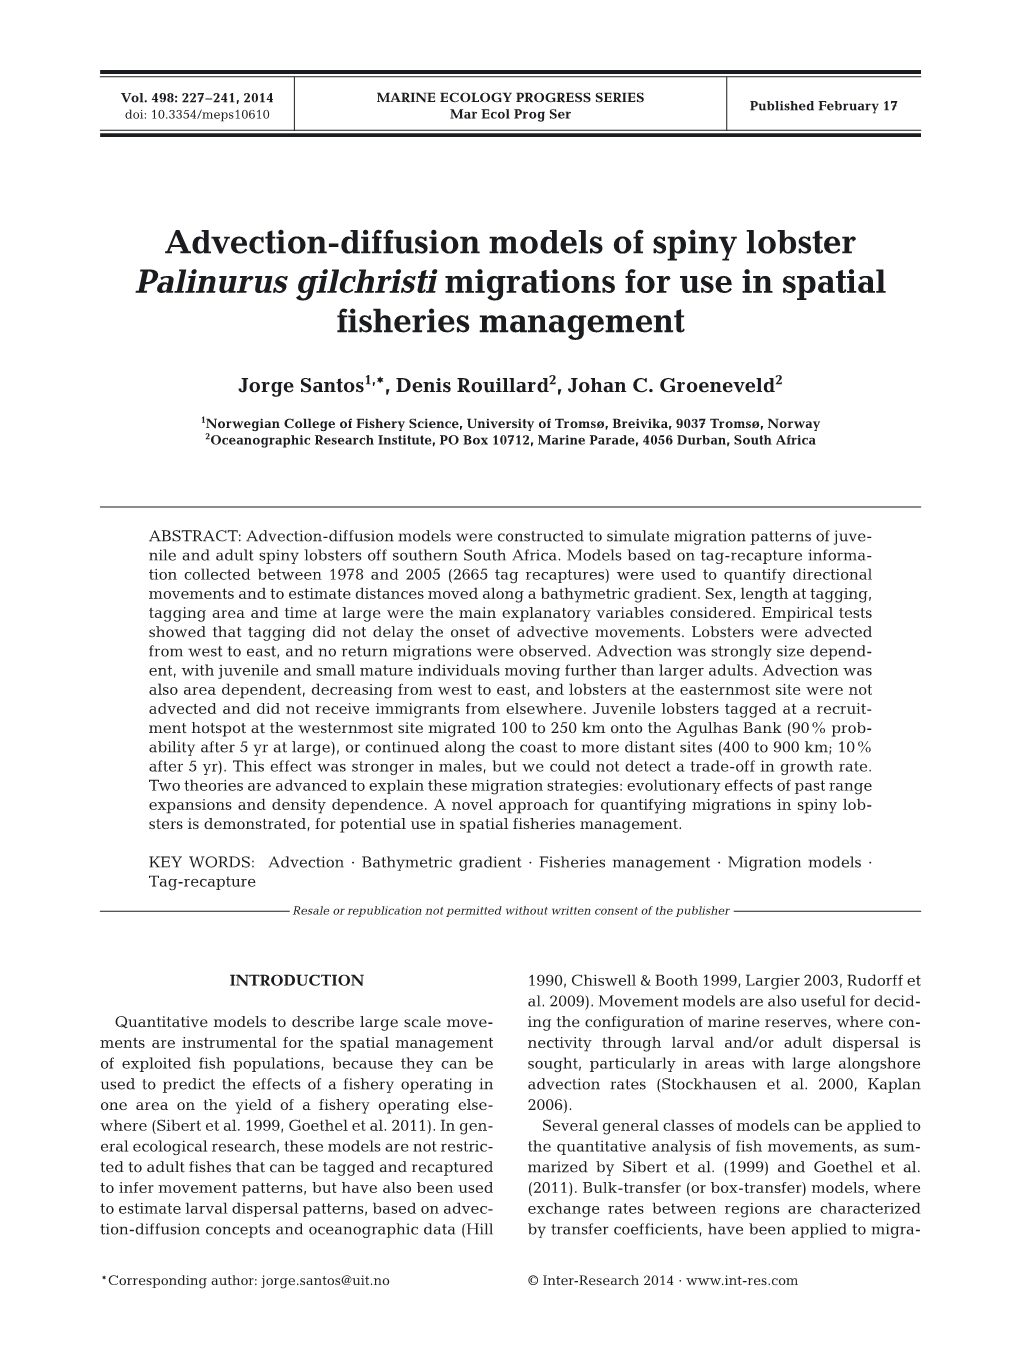 Advection-Diffusion Models of Spiny Lobster Palinurus Gilchristi Migrations for Use in Spatial Fisheries Management